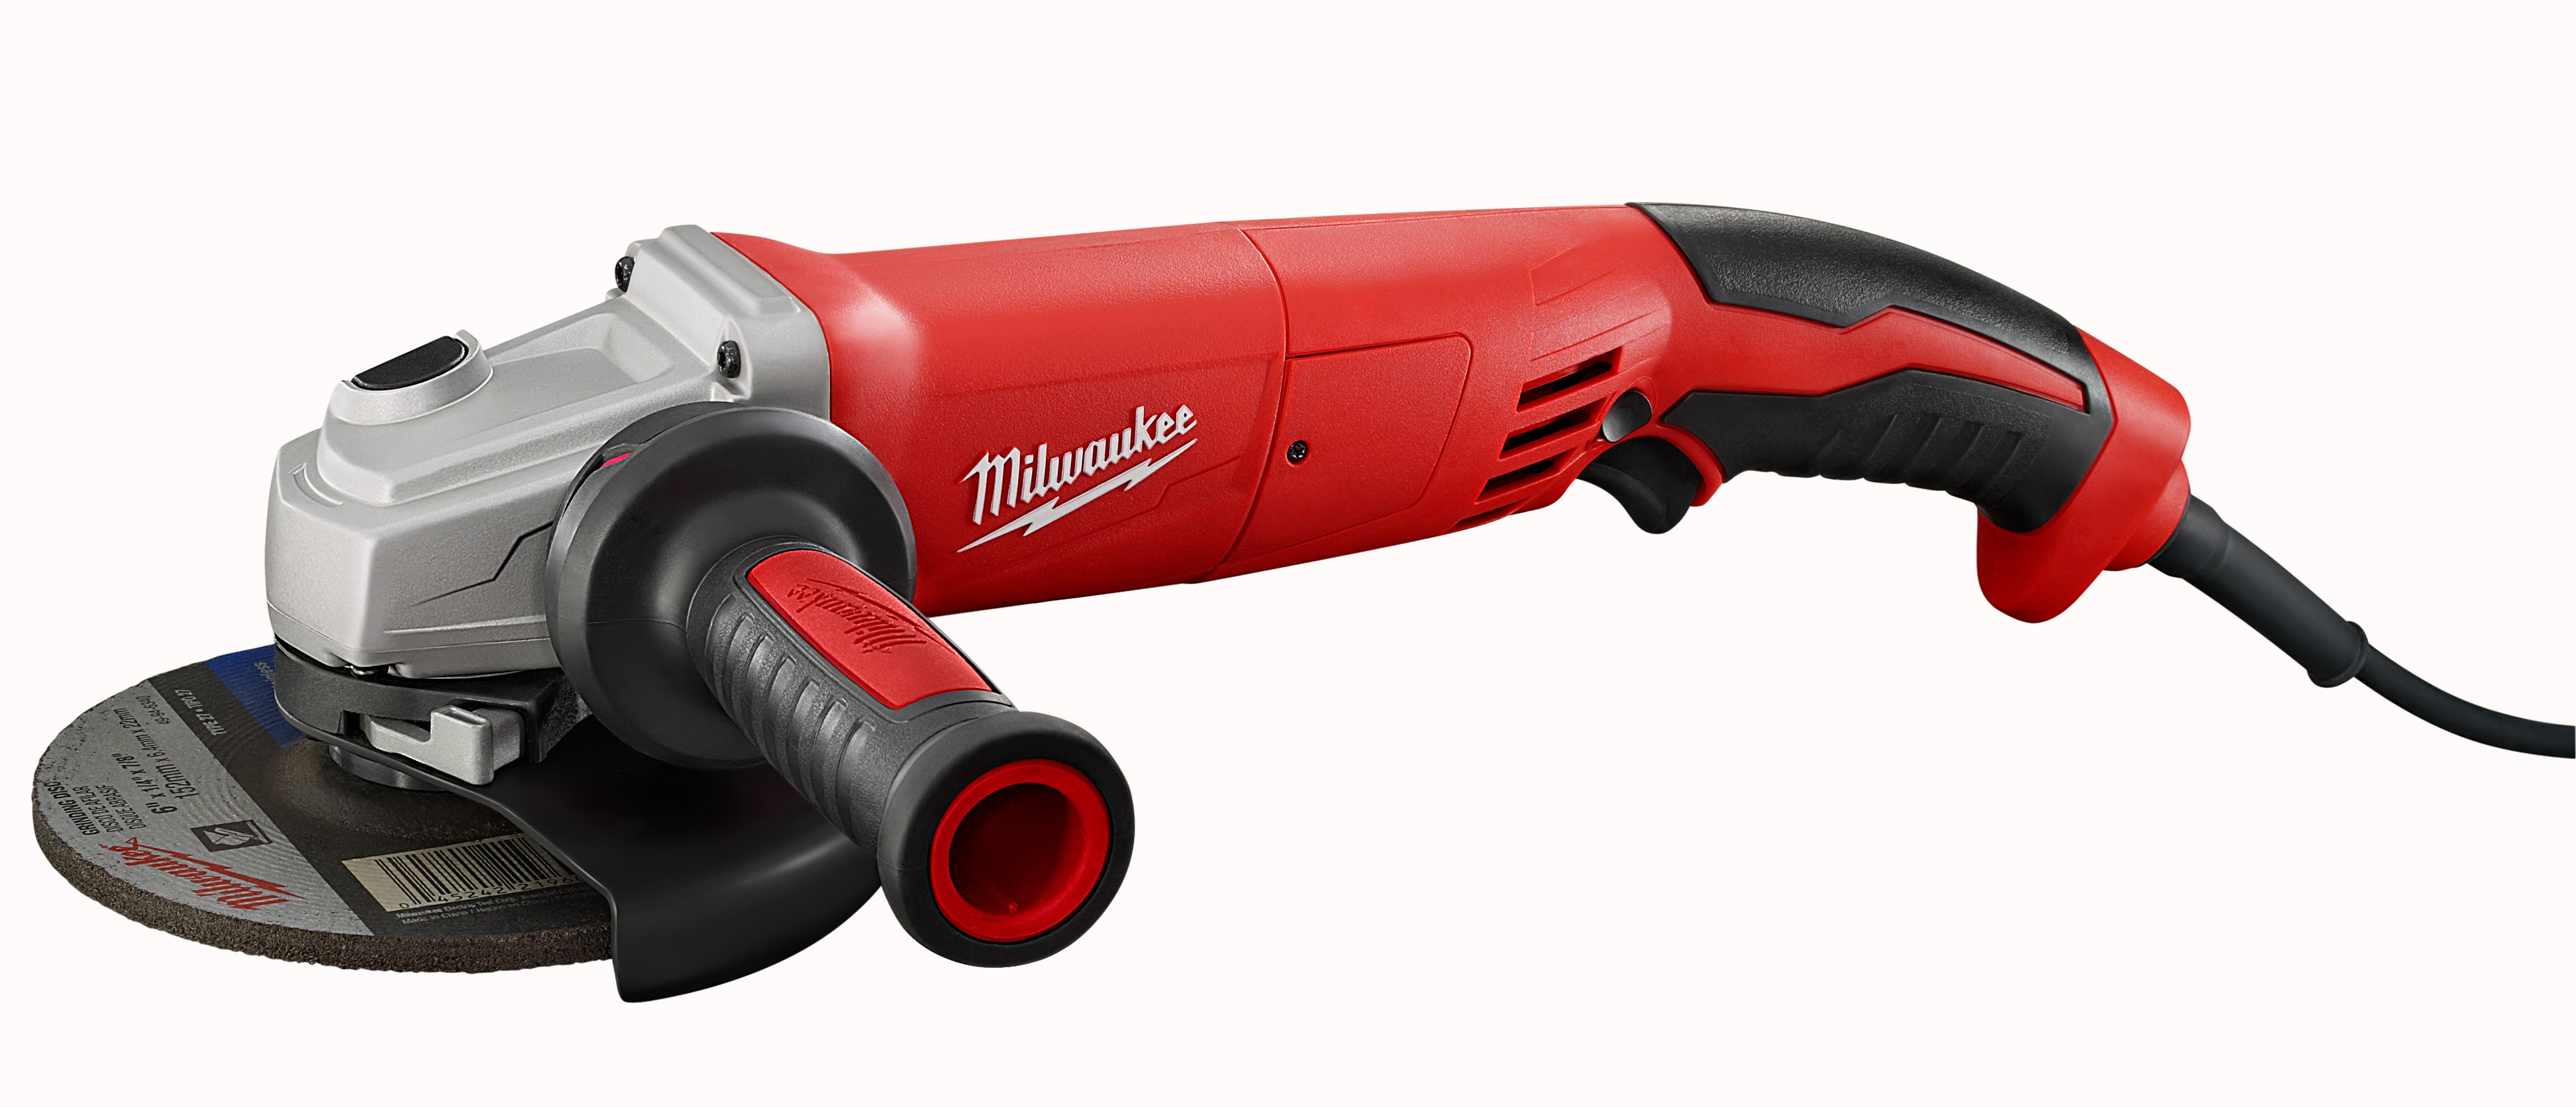 Milwaukee® 6124-31 Double Insulated Small Angle Grinder, 5 in Dia Wheel, 5/8-11 Arbor/Shank, 120 VAC, Black/Red